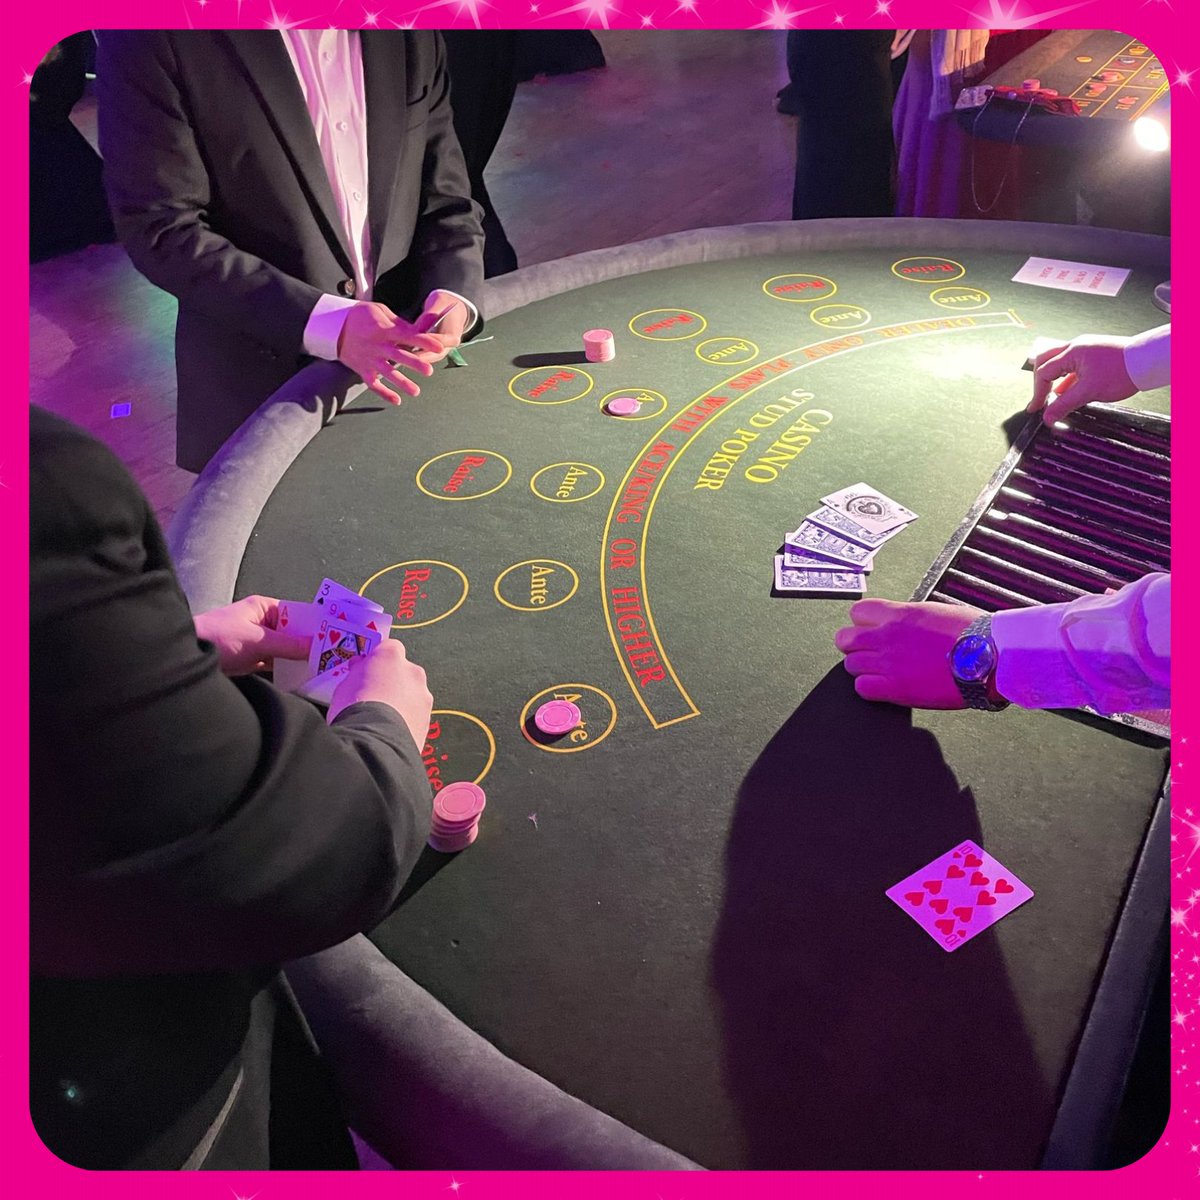 Get ready to hit the tables with our stud poker fun casino hire! Our professional dealers will bring the excitement of the casino to your event. 🎲🎉 Book now for a night of high stakes, big wins, and unforgettable fun. #pokerparty #casinonight #studpoker #funcasinohire